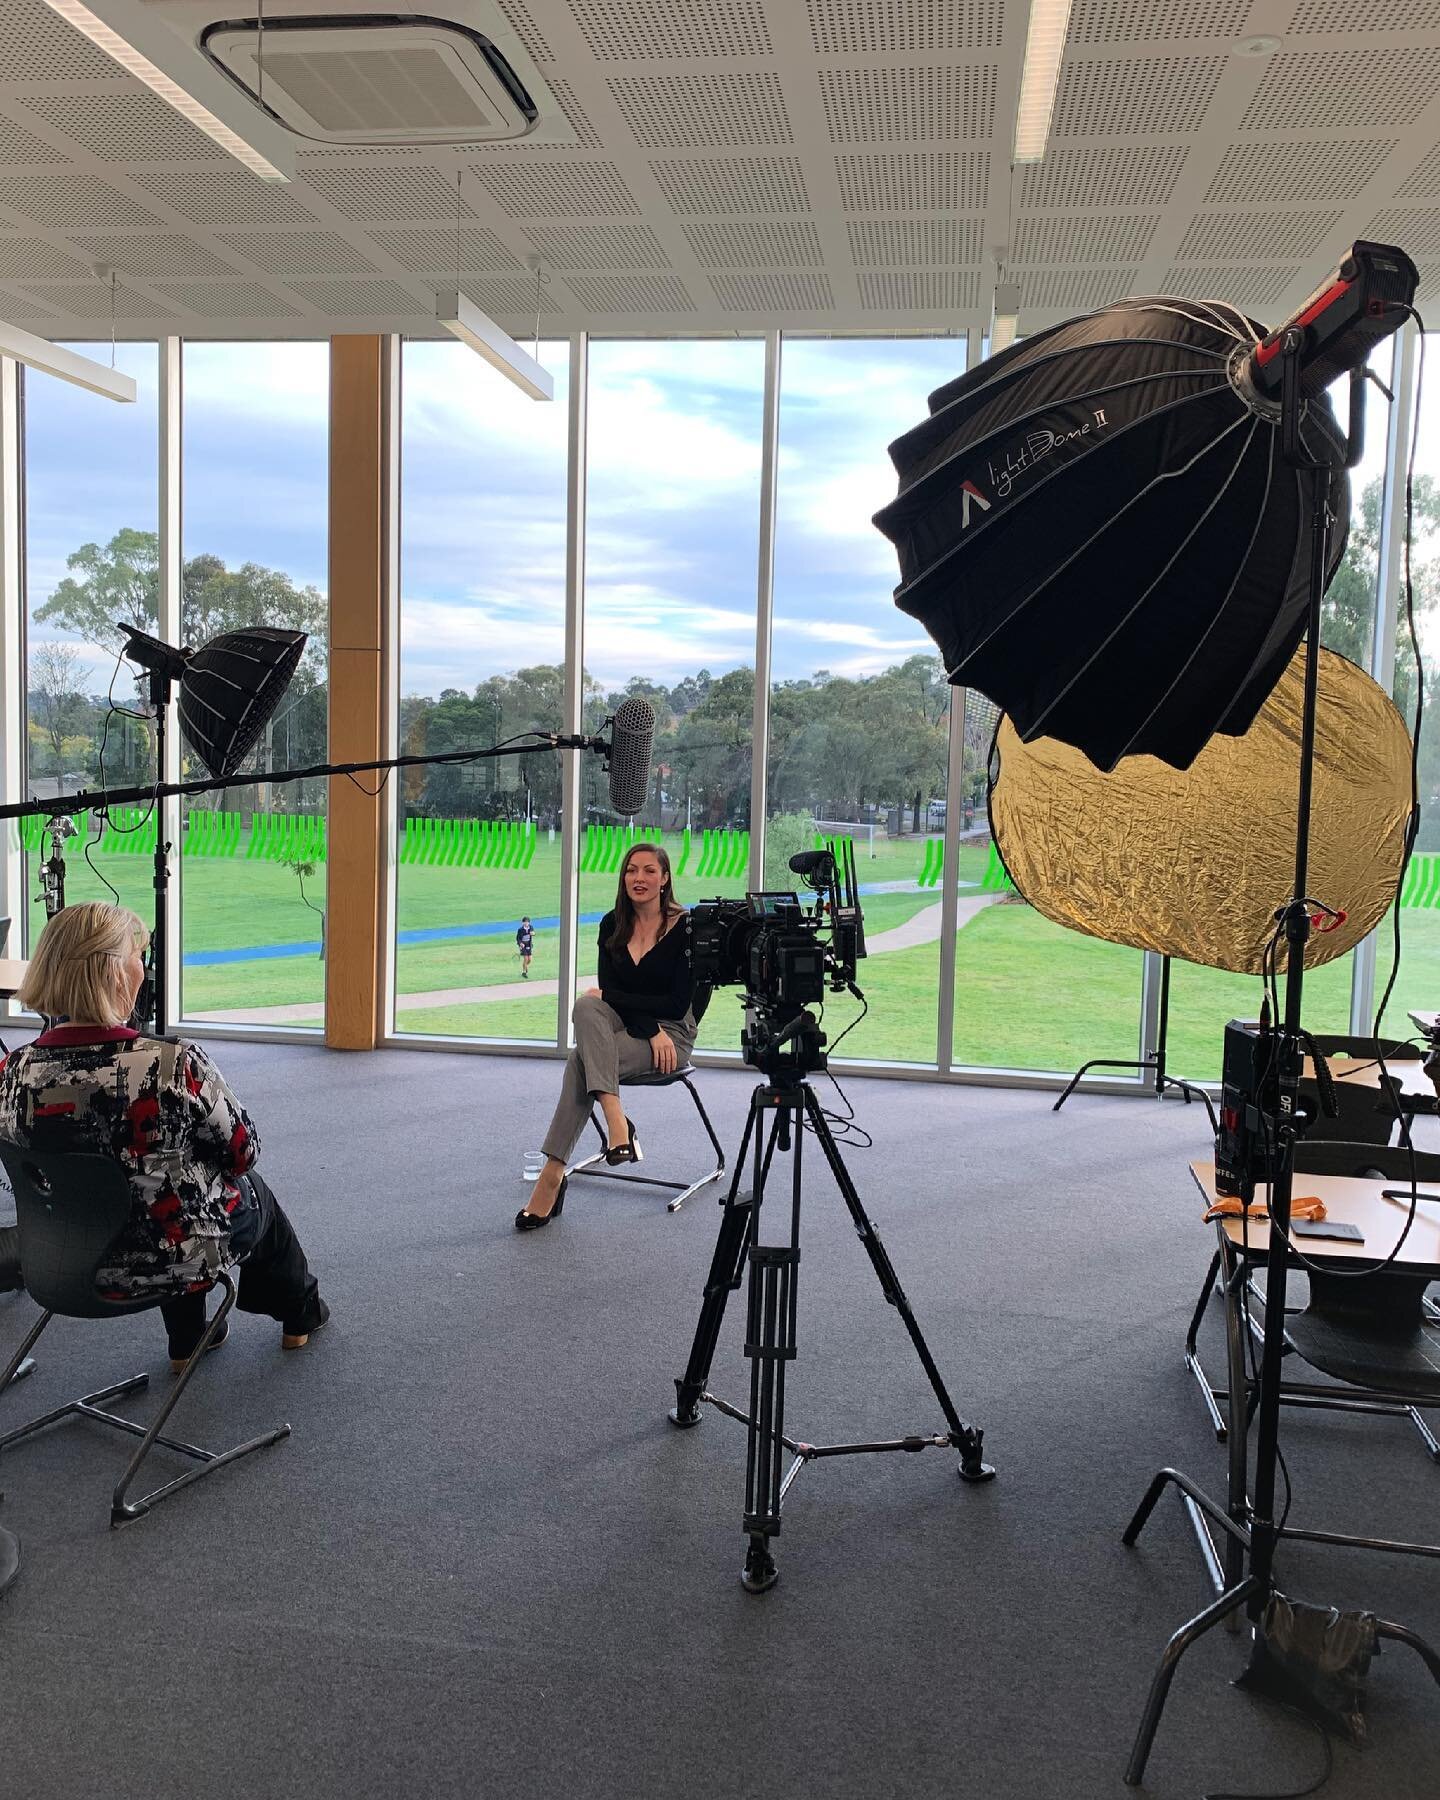 Behind the scenes of this mornings shoot for Tintern Grammar. Filming a short feature on Tinterns Alumni and scholarship program.